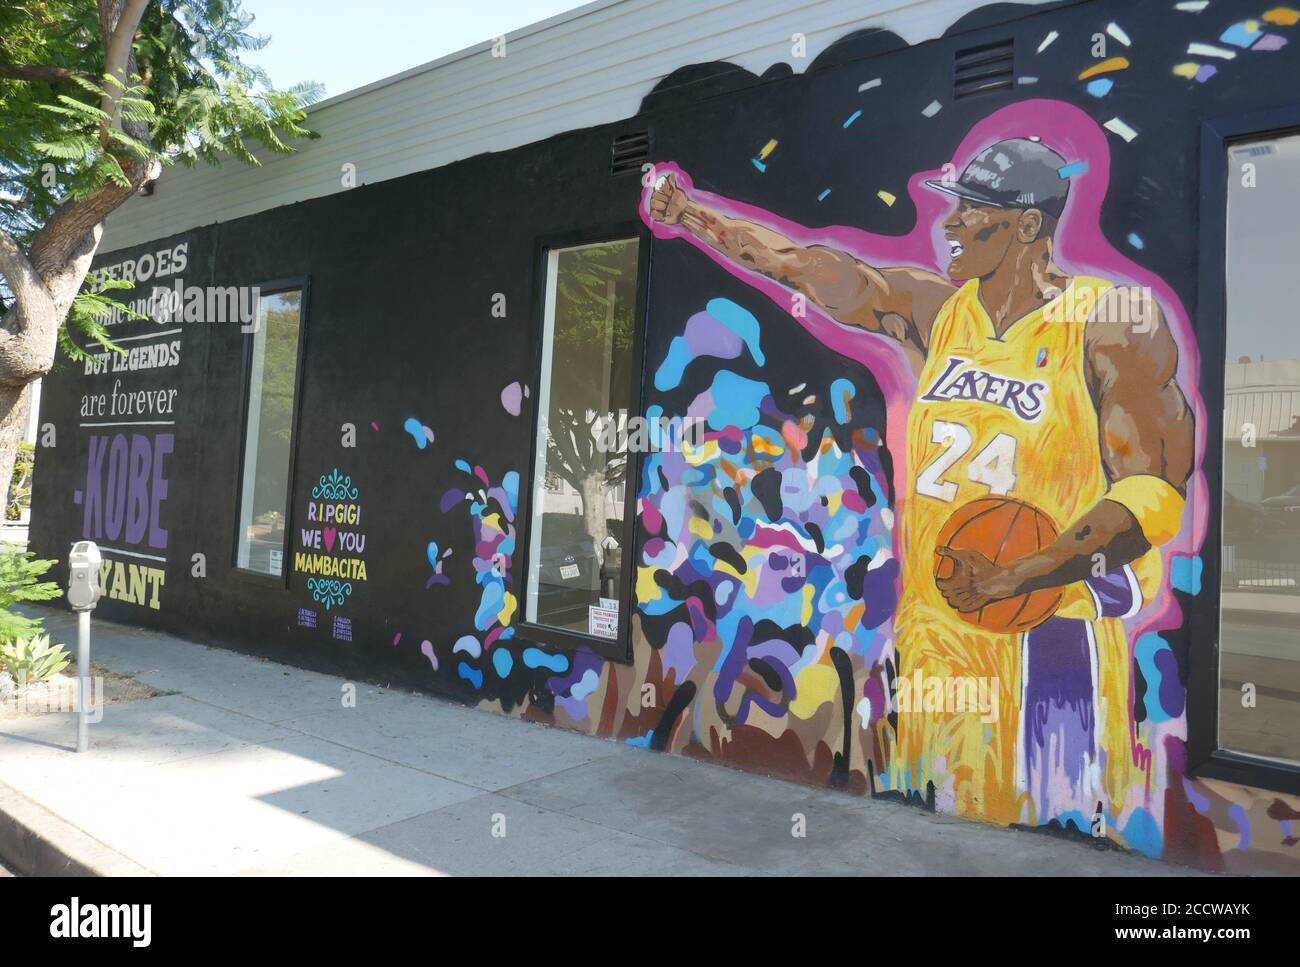 Los Angeles, California, USA 24th August 2020 A general view of atmosphere of Kobe Bryant and Gigi Bryant Street Mural Art on Kobe Bryant Day during Coronavirus Covid-19 Pandemic on August 24, 2020 in Los Angeles, California, USA. Photo by Barry King/Alamy Stock Photo Stock Photo